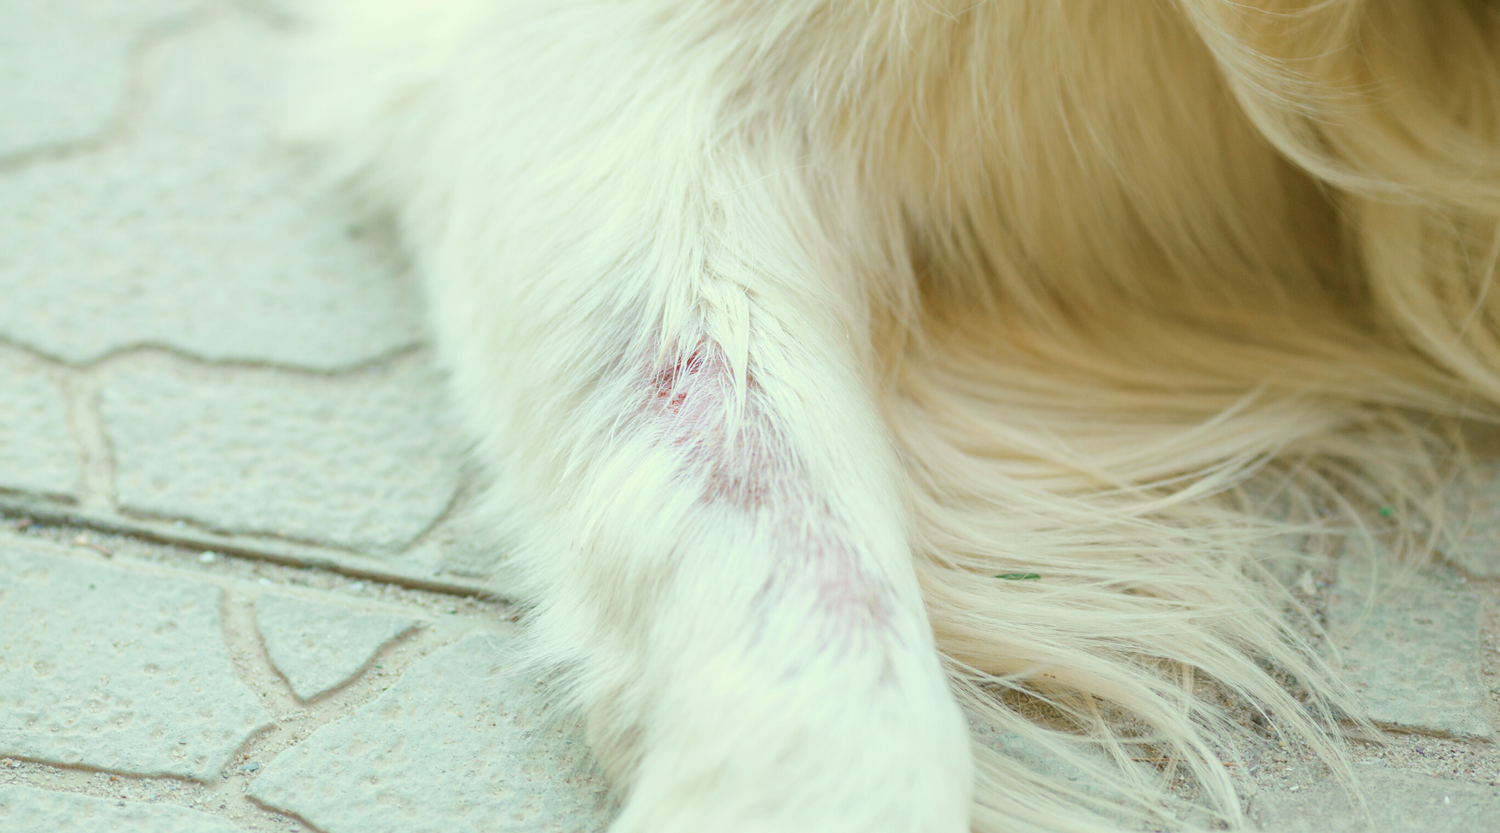 DOs and DON'Ts for Pet Eczema